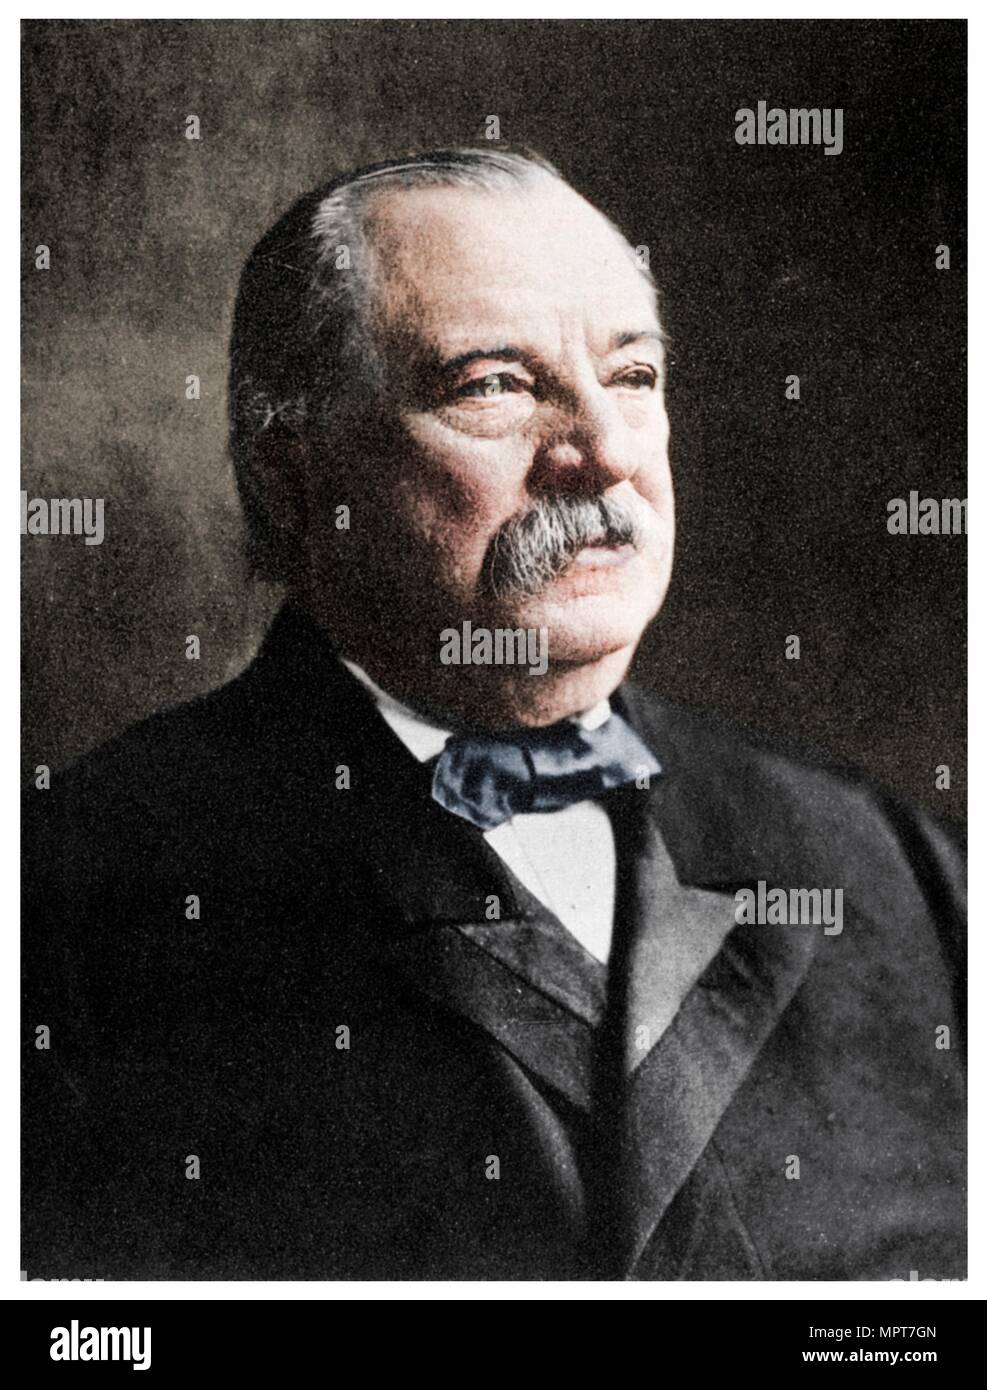 Grover Cleveland, 22nd and 24th President of the United States, 19th century (1955). Artist: Unknown. Stock Photo